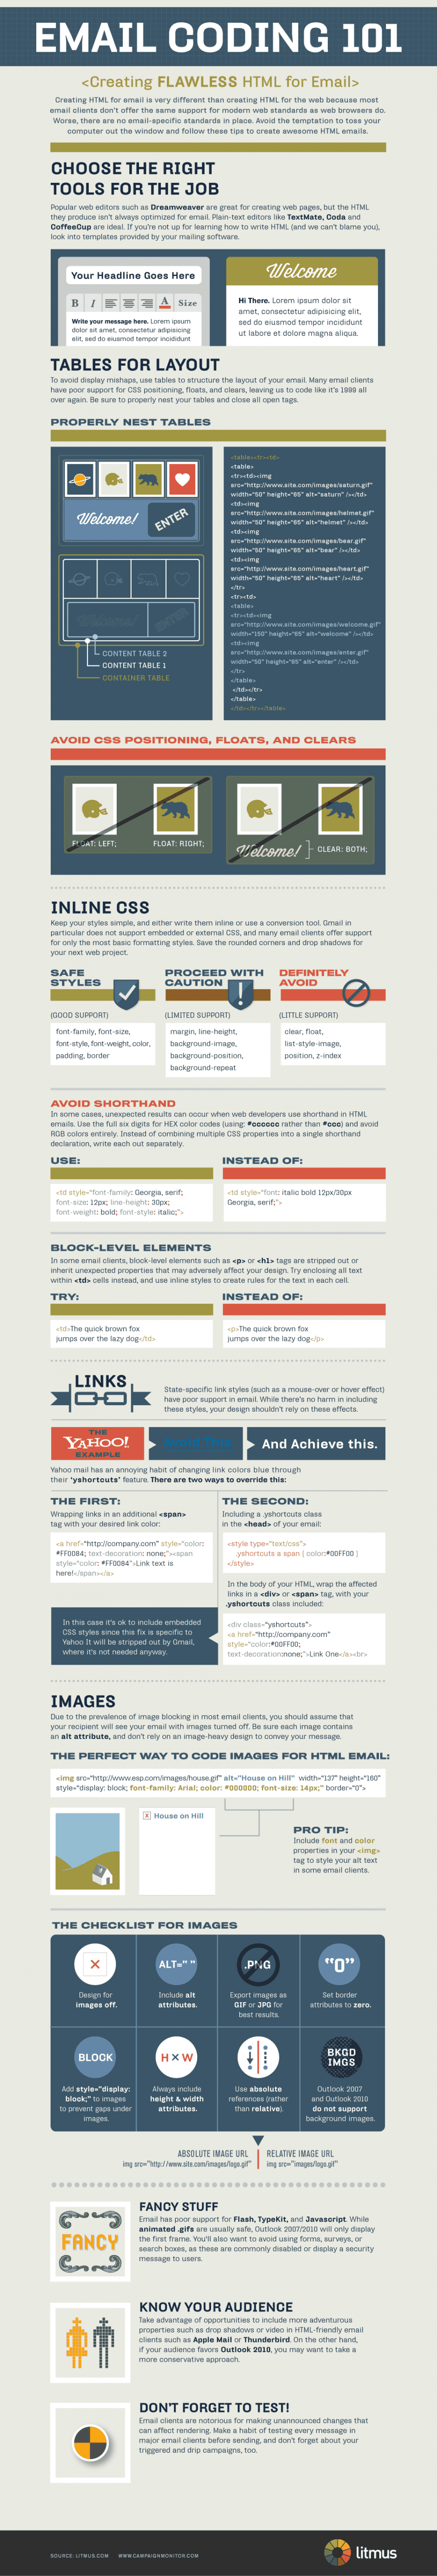 Visual Guide to Coding HTML Email